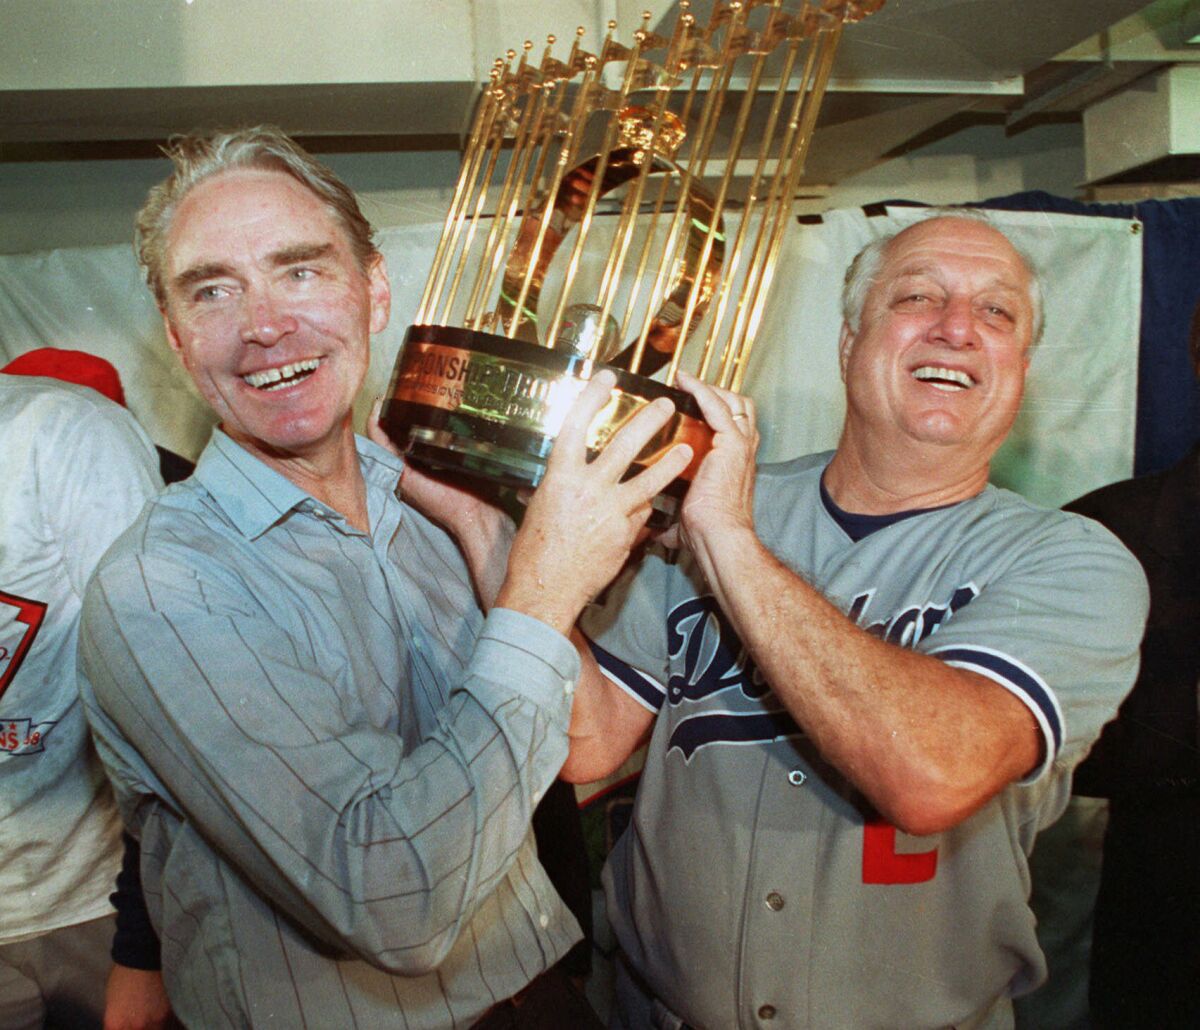 Fred Claire, Dodgers vice president, and Lasorda hoist the World Series trophy after their team's 1988 victory.